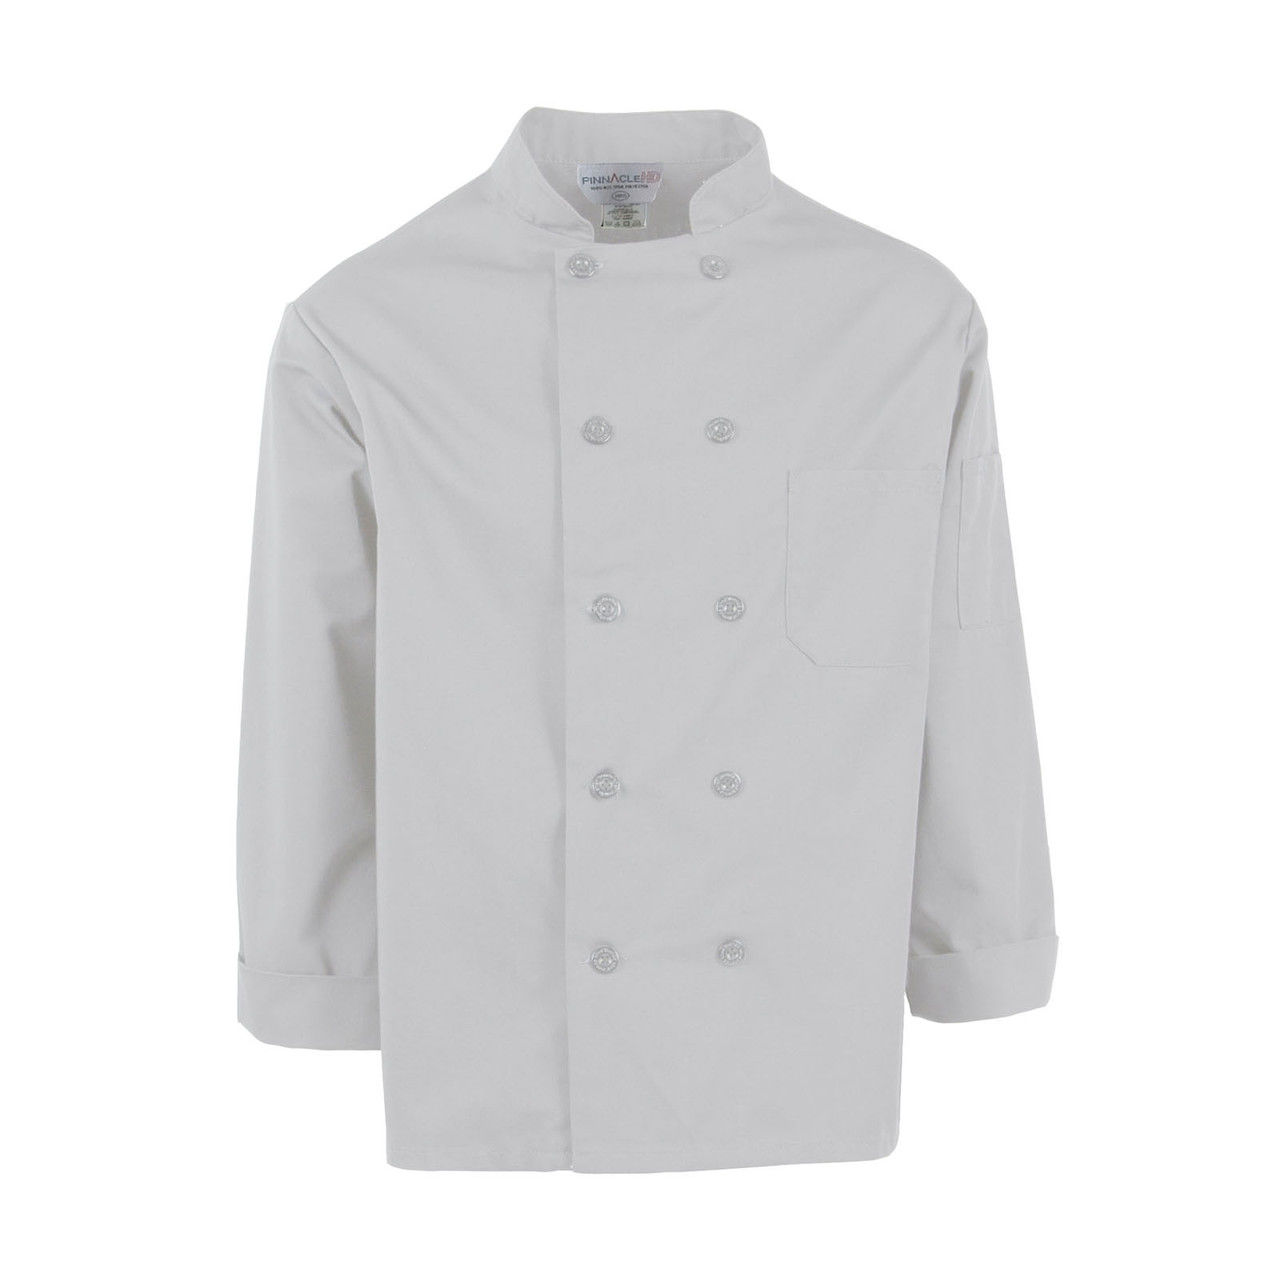 What's the weave style of Pinnacle chef coats?